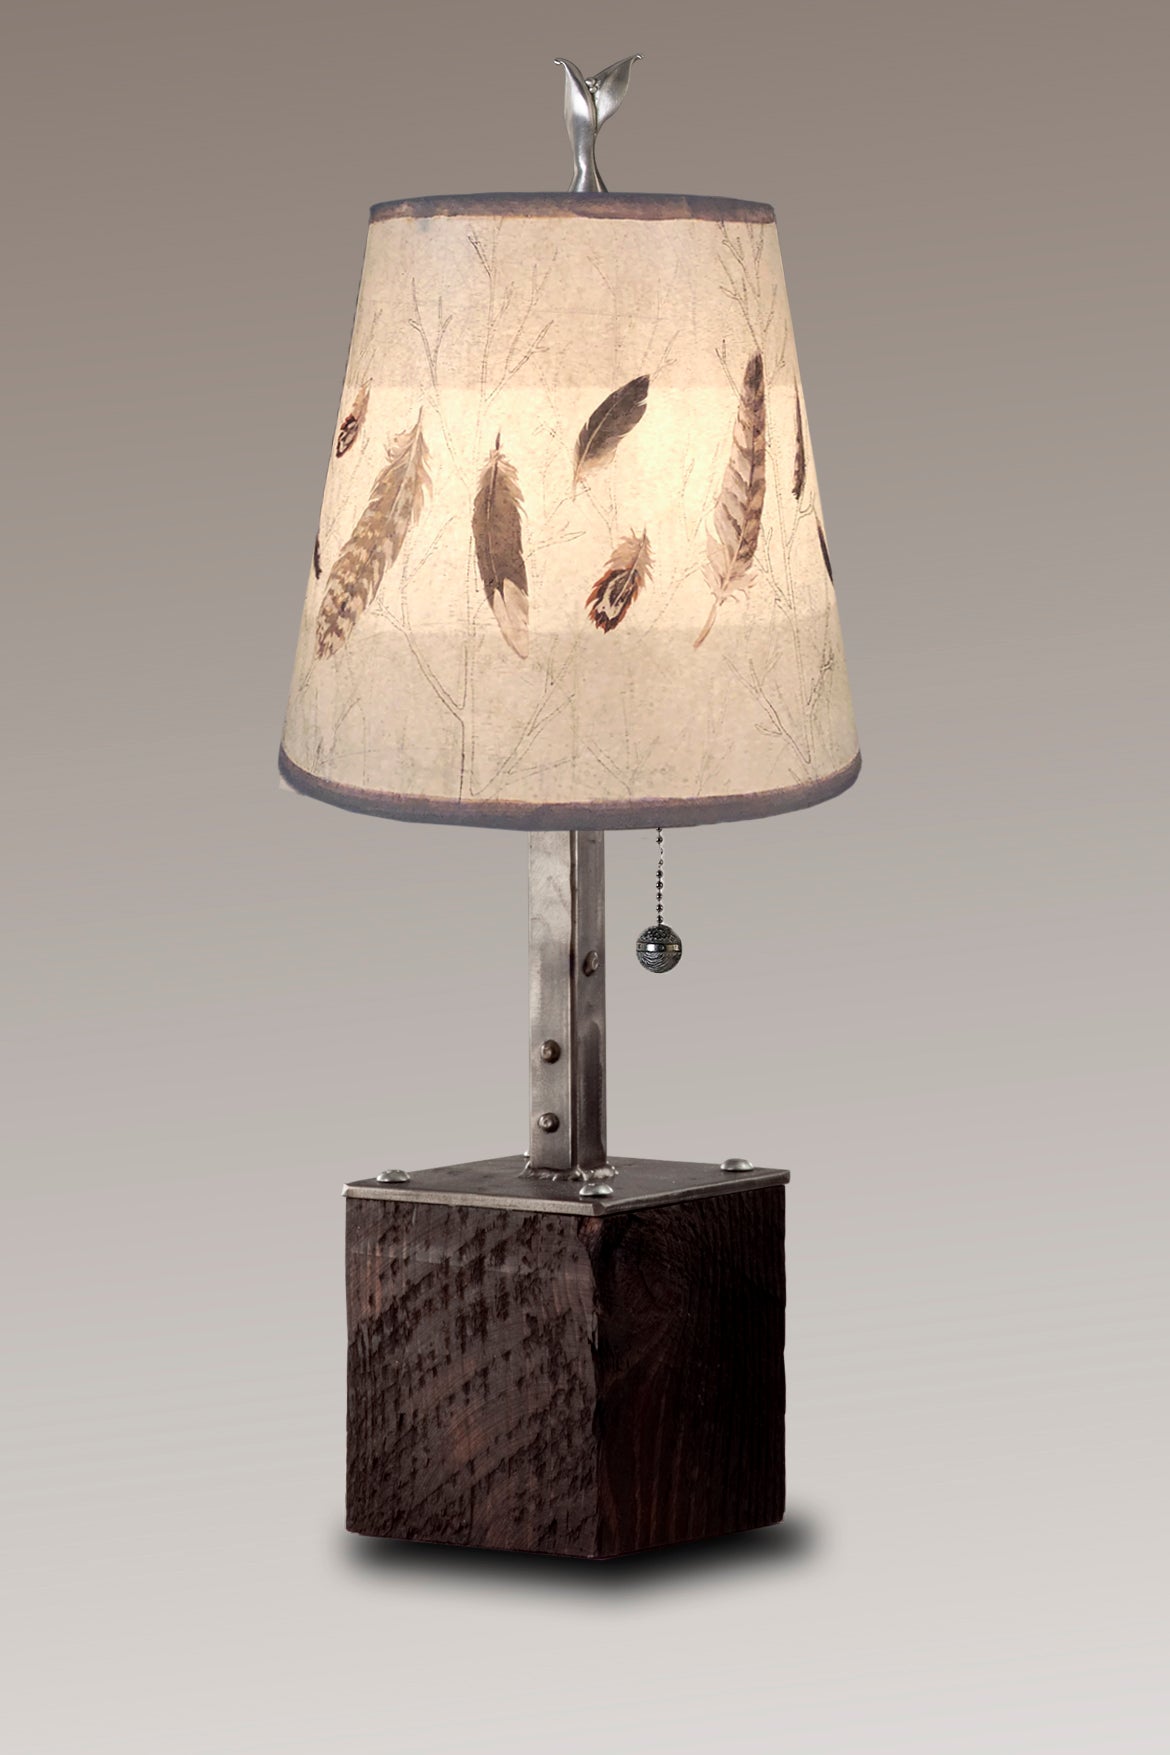 Janna Ugone & Co Table Lamps Steel Table Lamp on Reclaimed Wood with Small Drum Shade in Feathers in Pebble